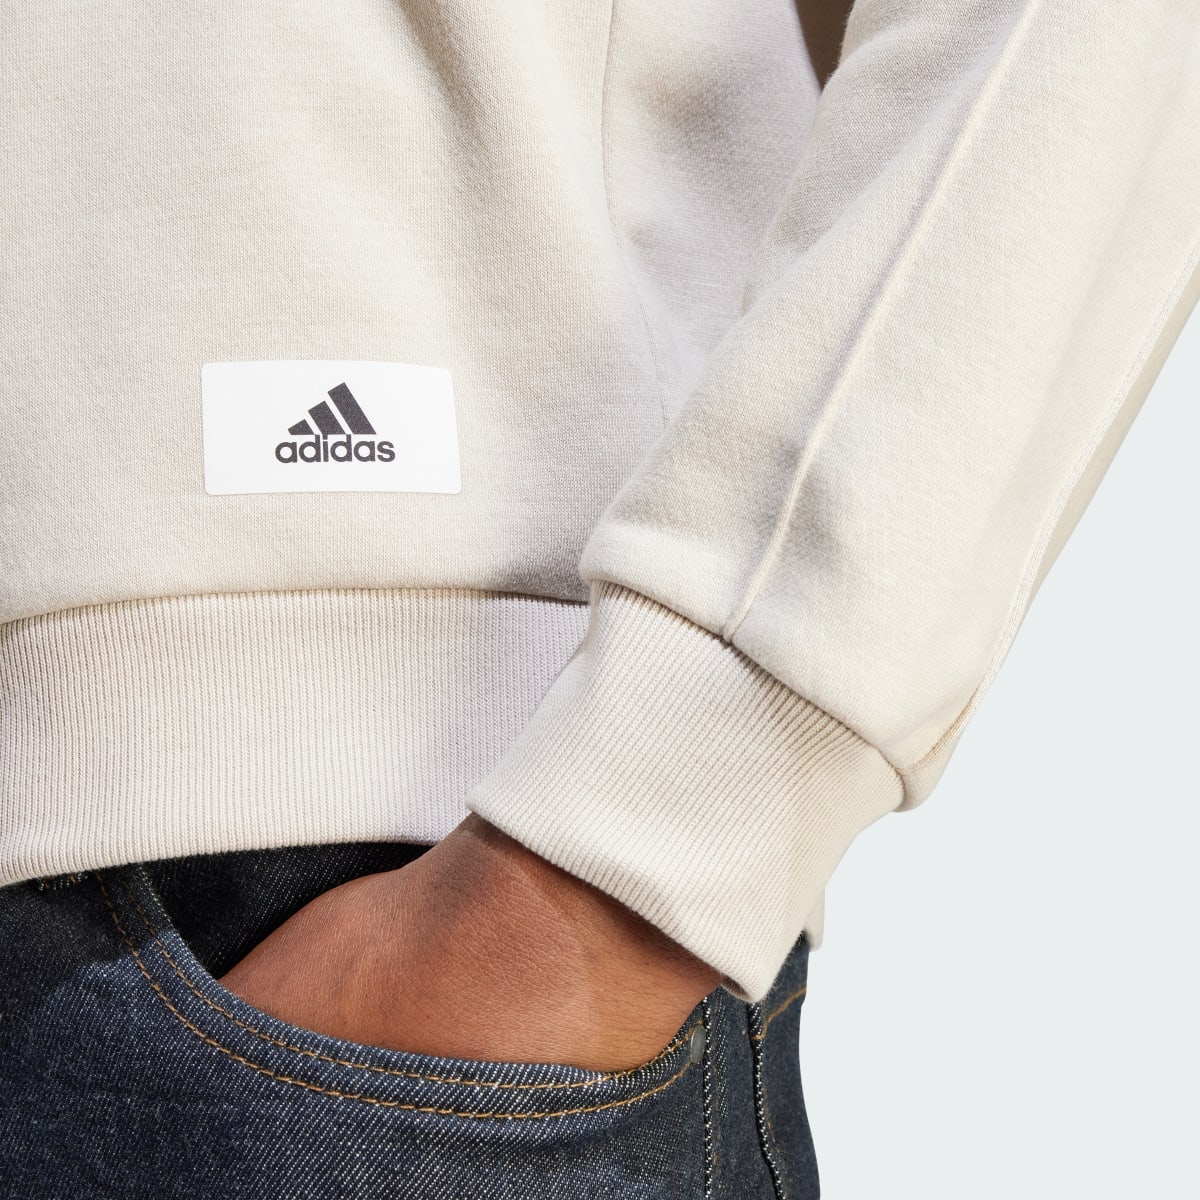 Adidas The Safe Place Hoodie. 7